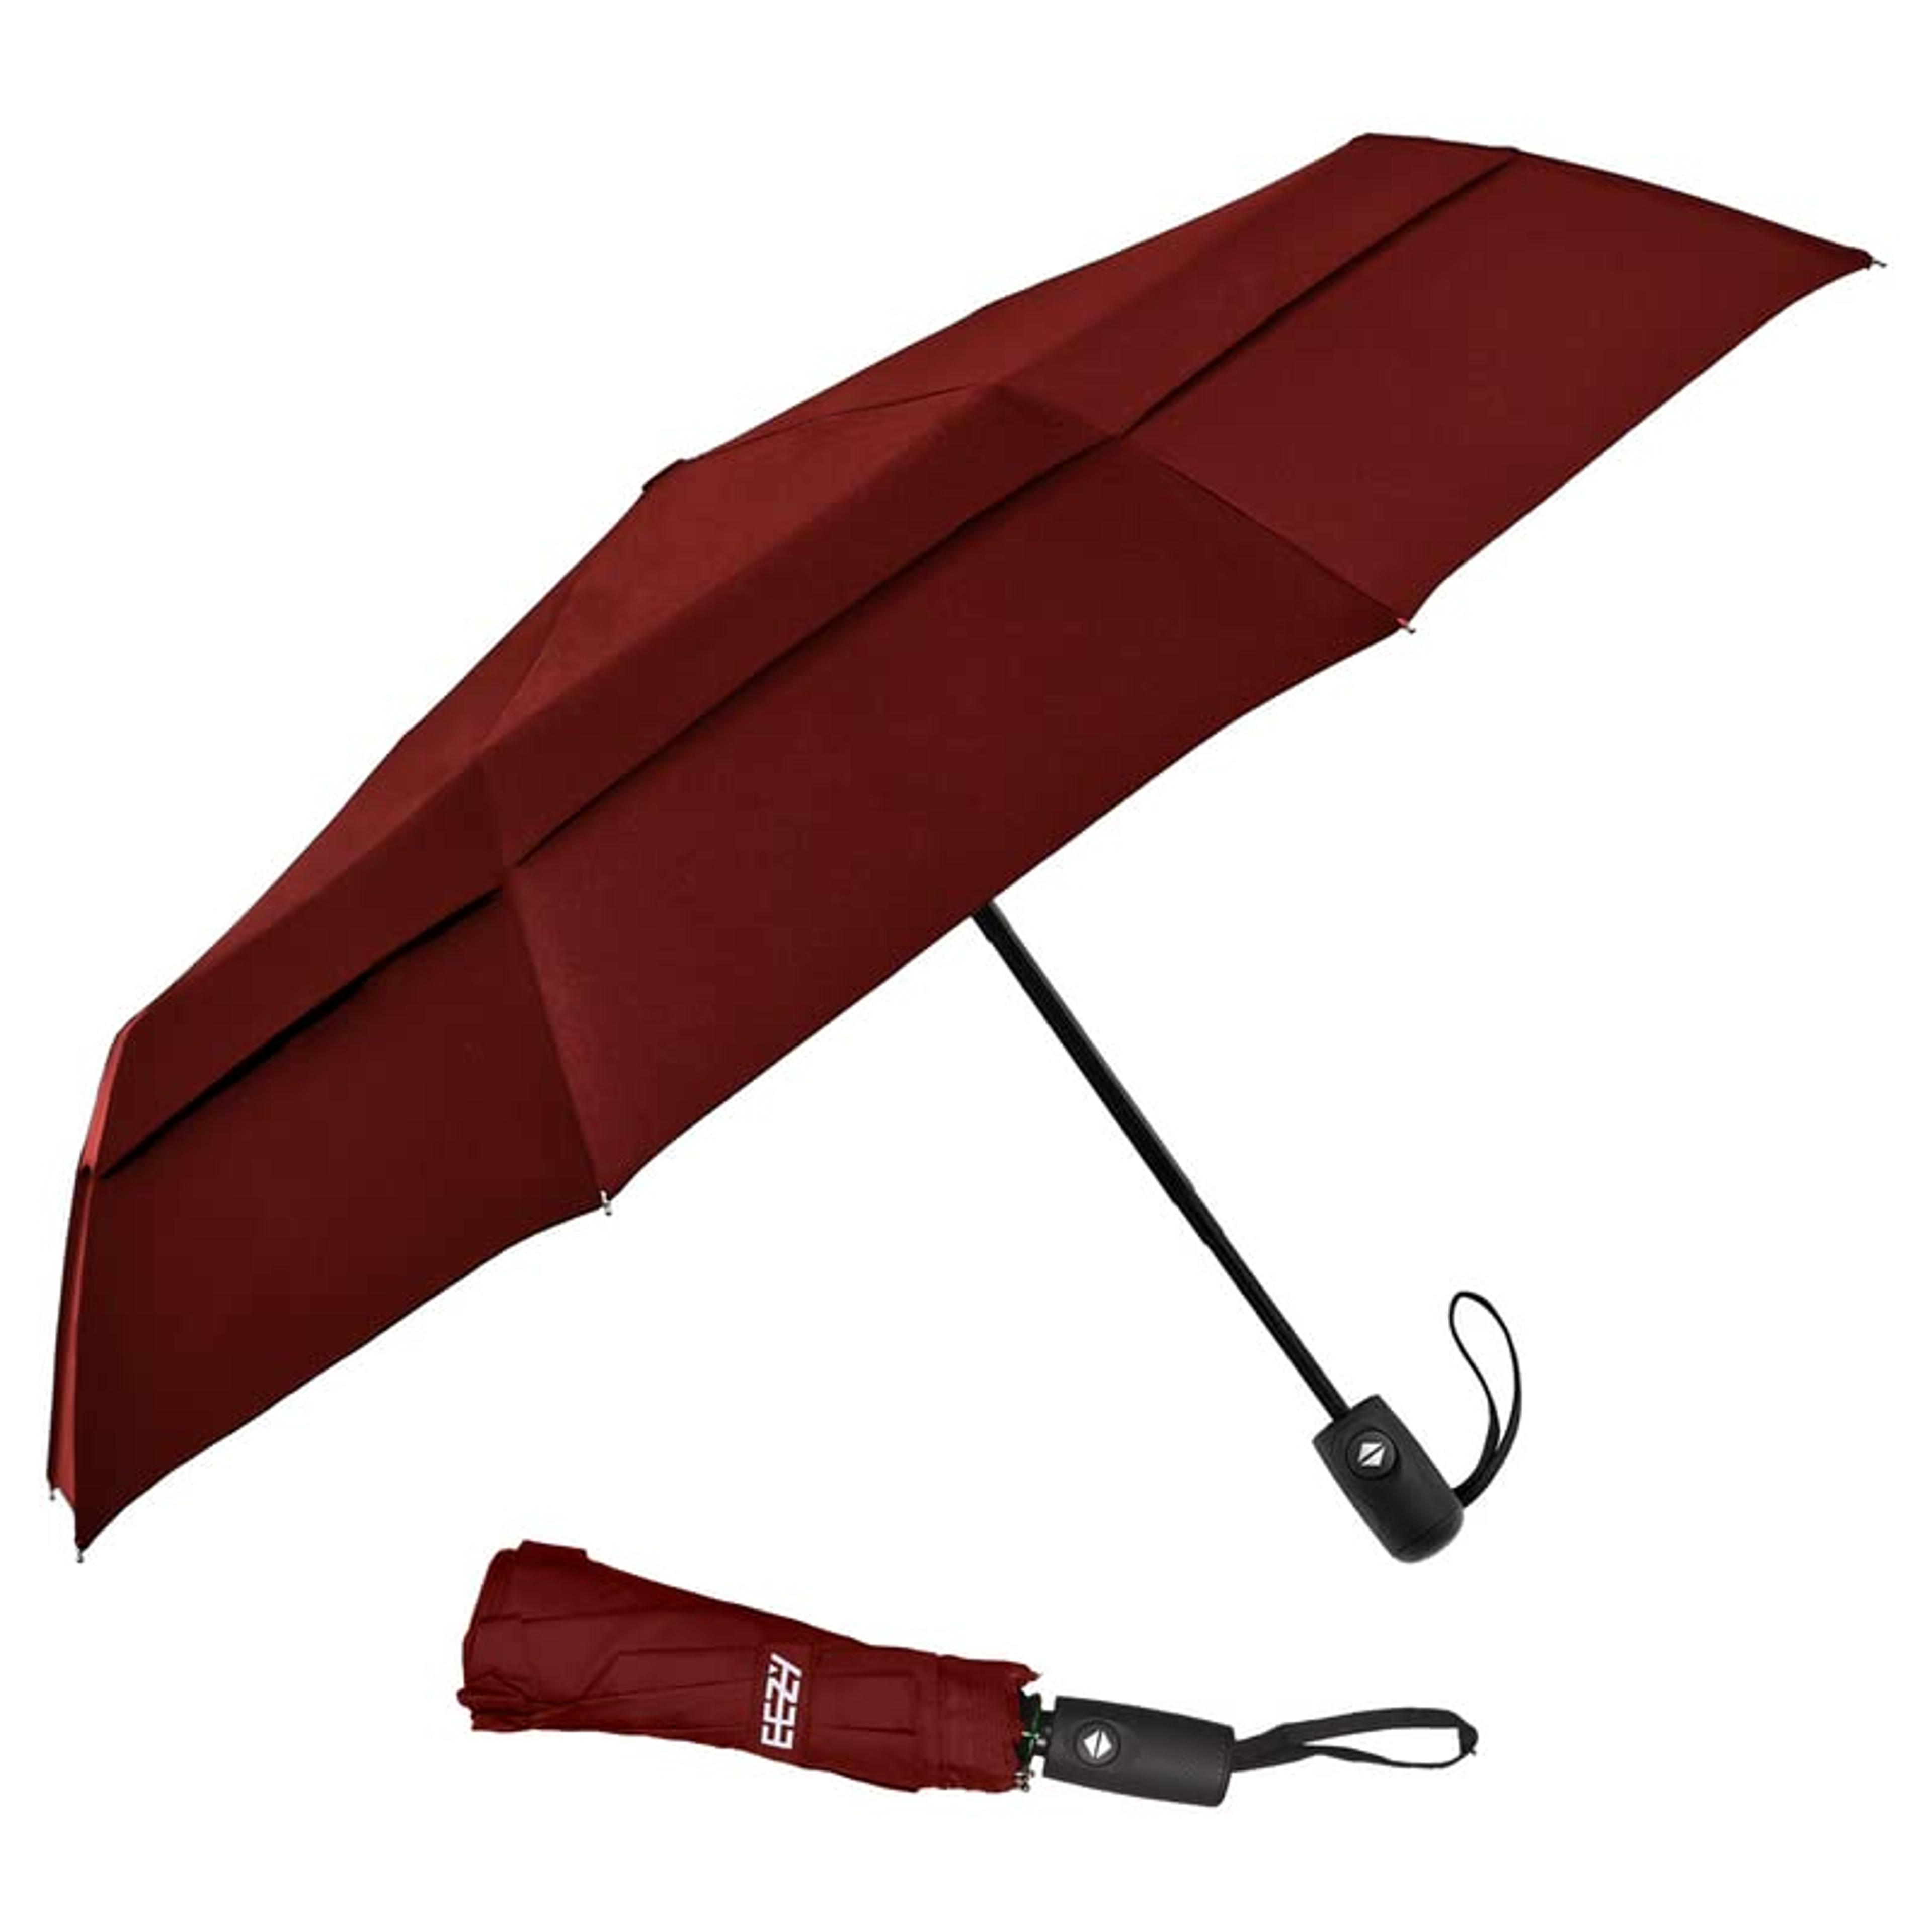 EEZ-Y Windproof Travel Umbrellas for Rain - Lightweight, Strong, Compact with & Easy Auto Open/Close Button for Single Hand Use - Double Vented Canopy for Men & Women Marsala